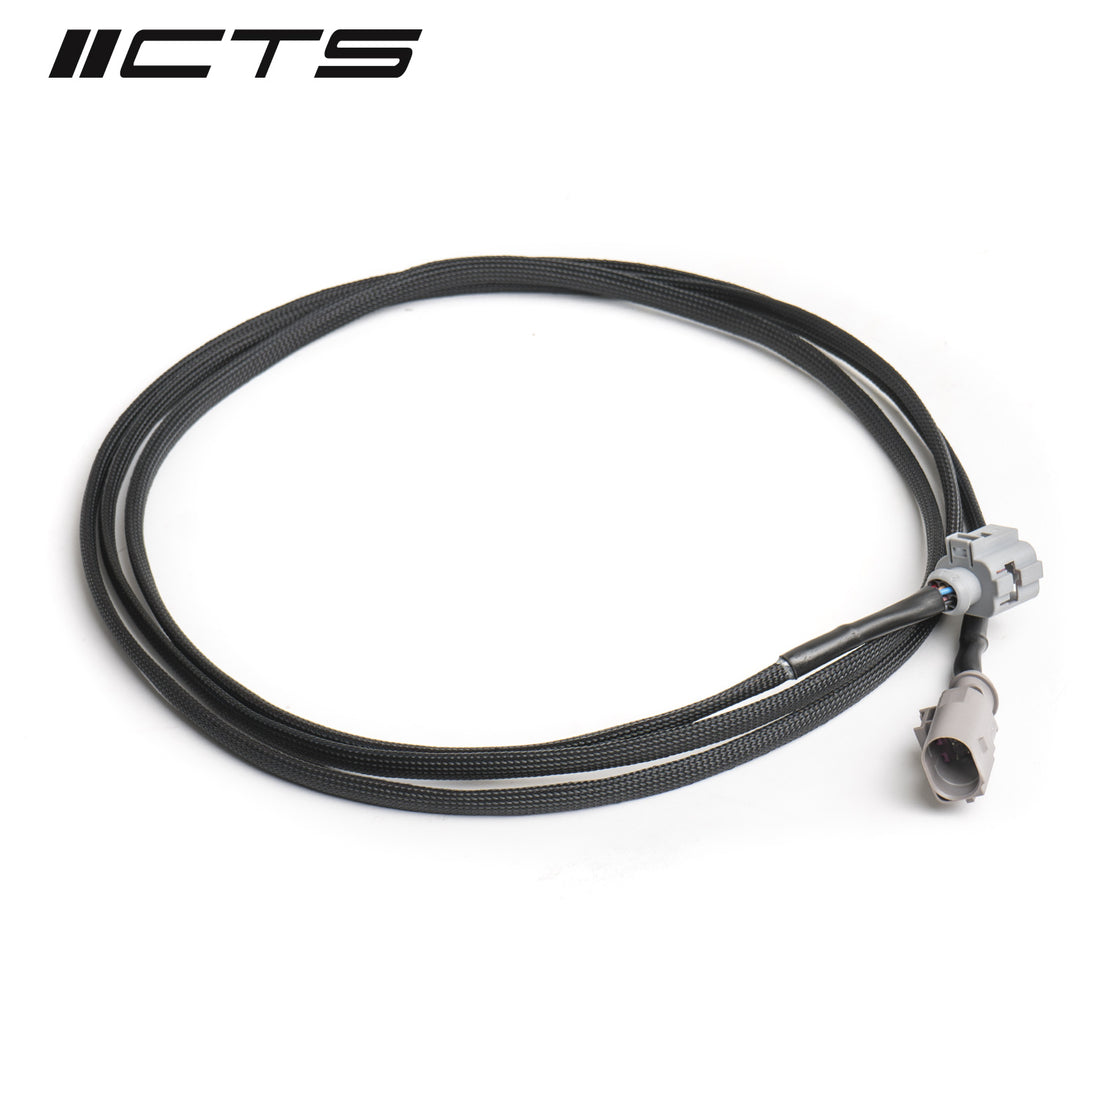 CTS Turbo Gen3 TSI Electronic Wastegate Actuator Extension Harness CTS Turbo WH-003